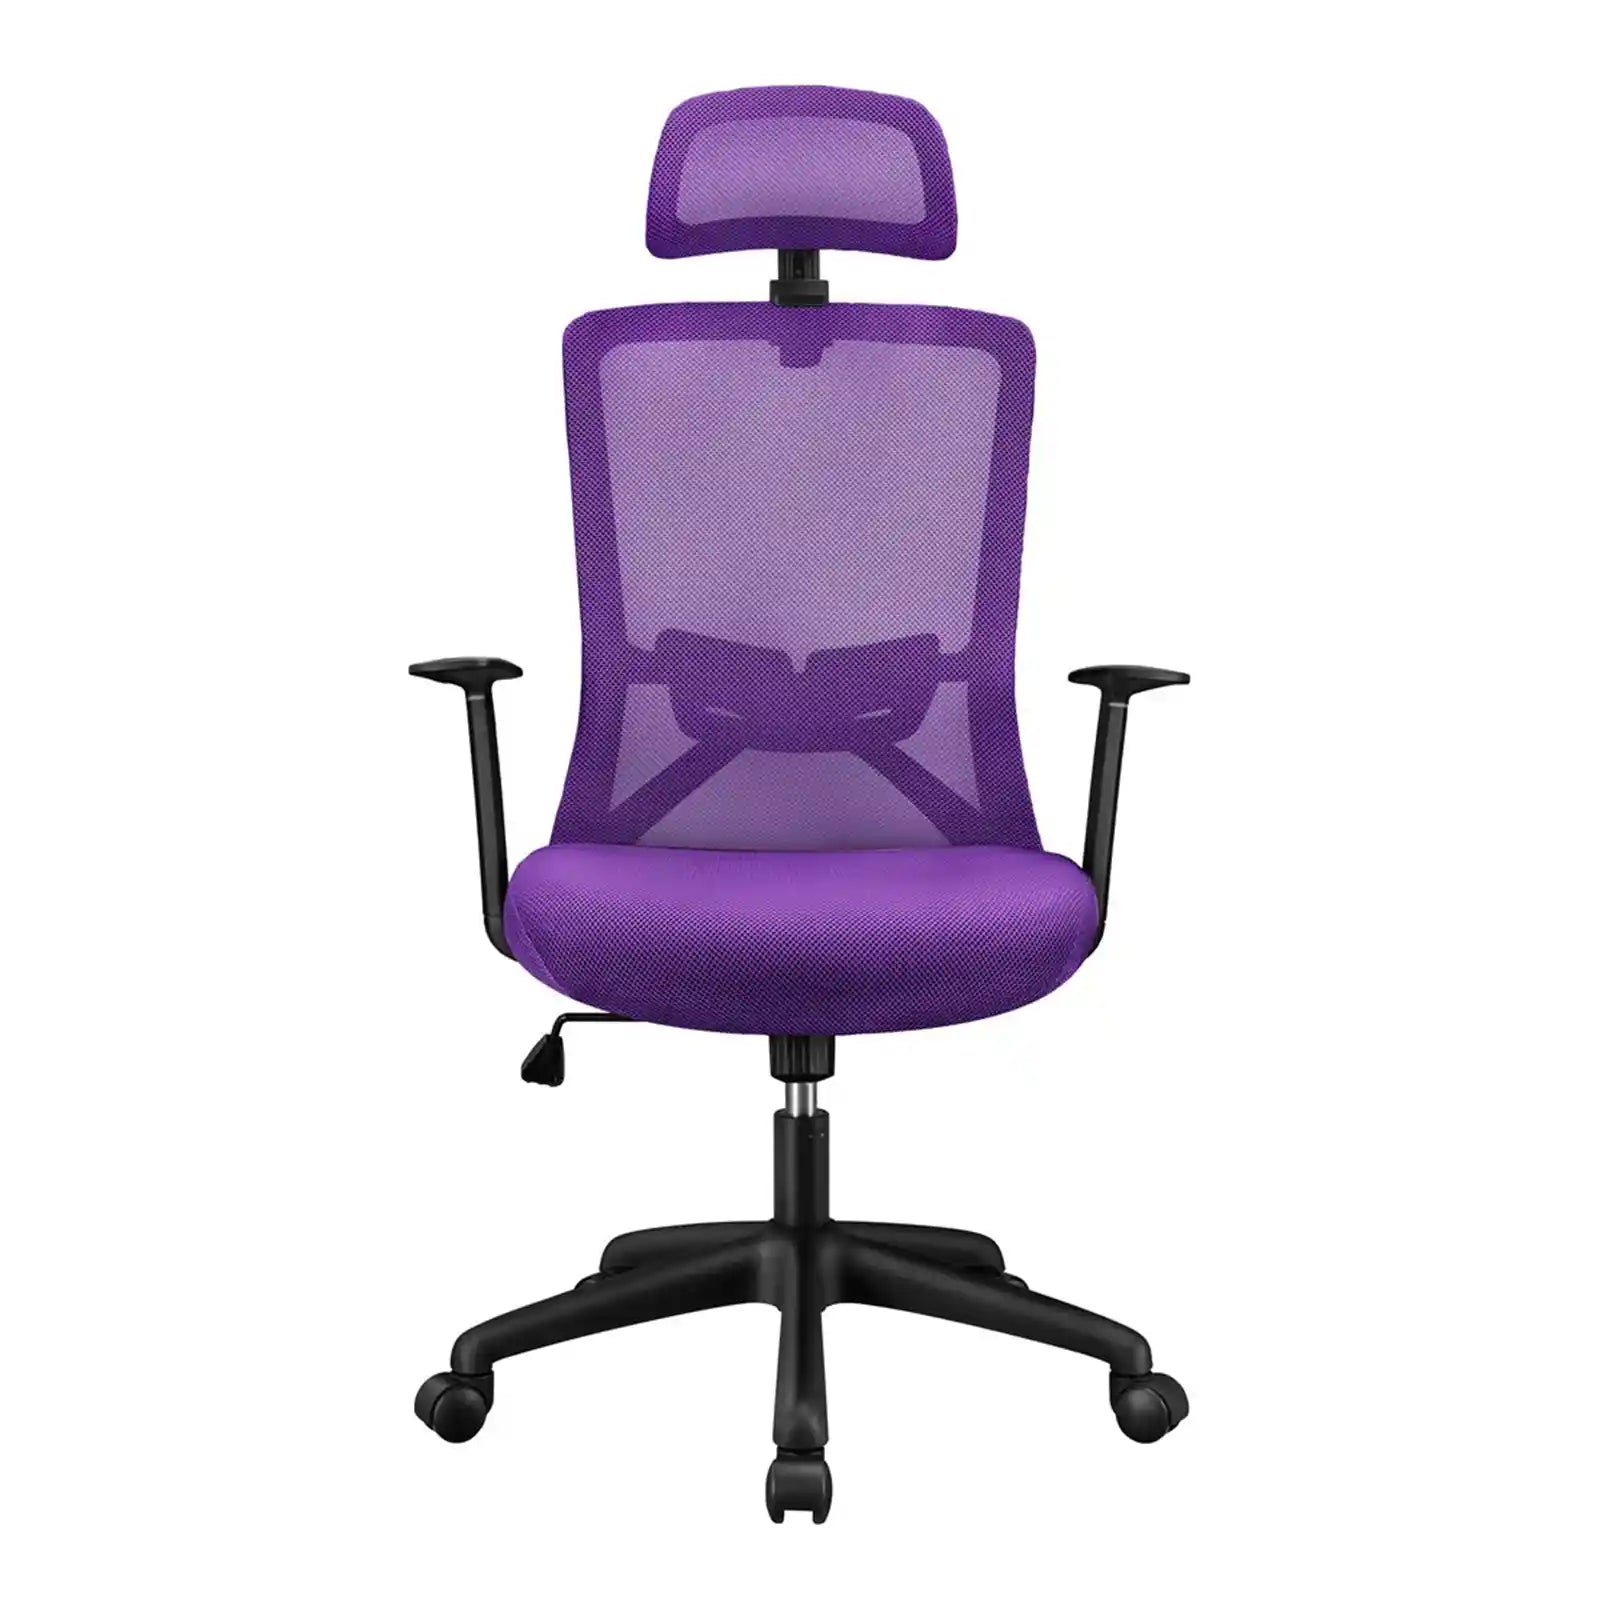 Ergonomic Chairs , Mesh Swivel Rolling Executive Office Chair with High Headrest